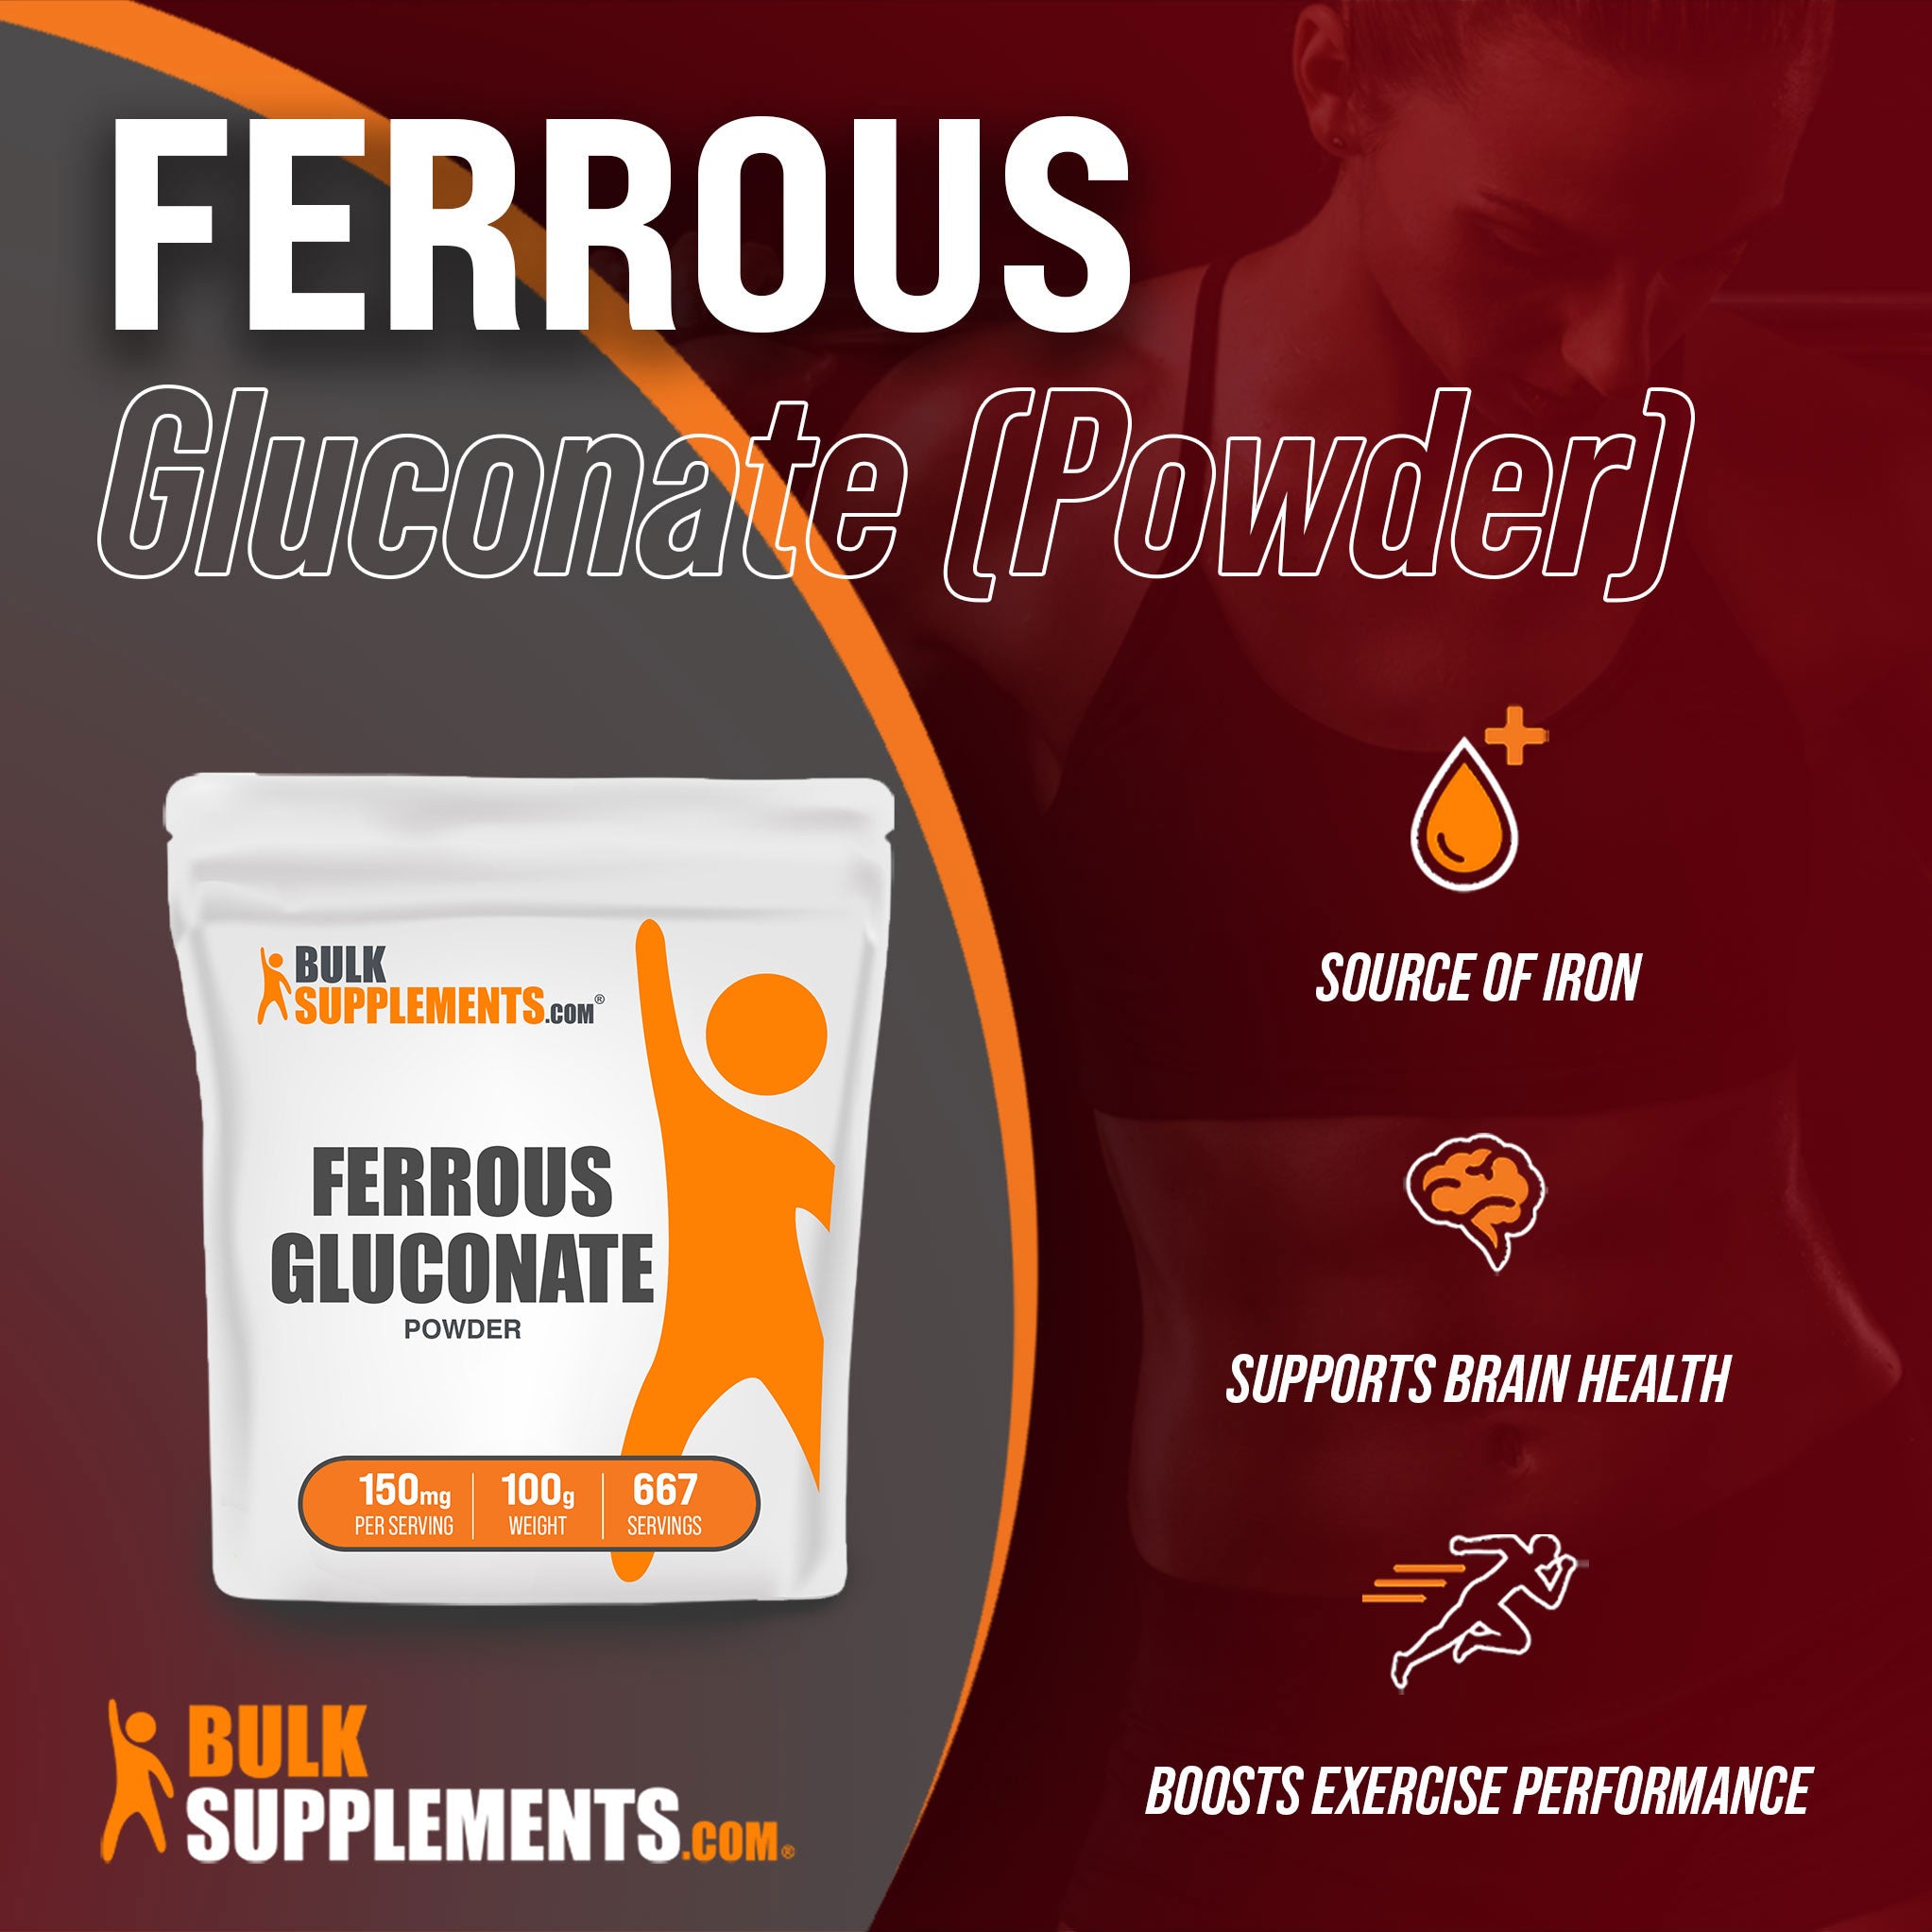 Benefits of Ferrous Gluconate; source of iron, supports brain health, boosts exercise performance